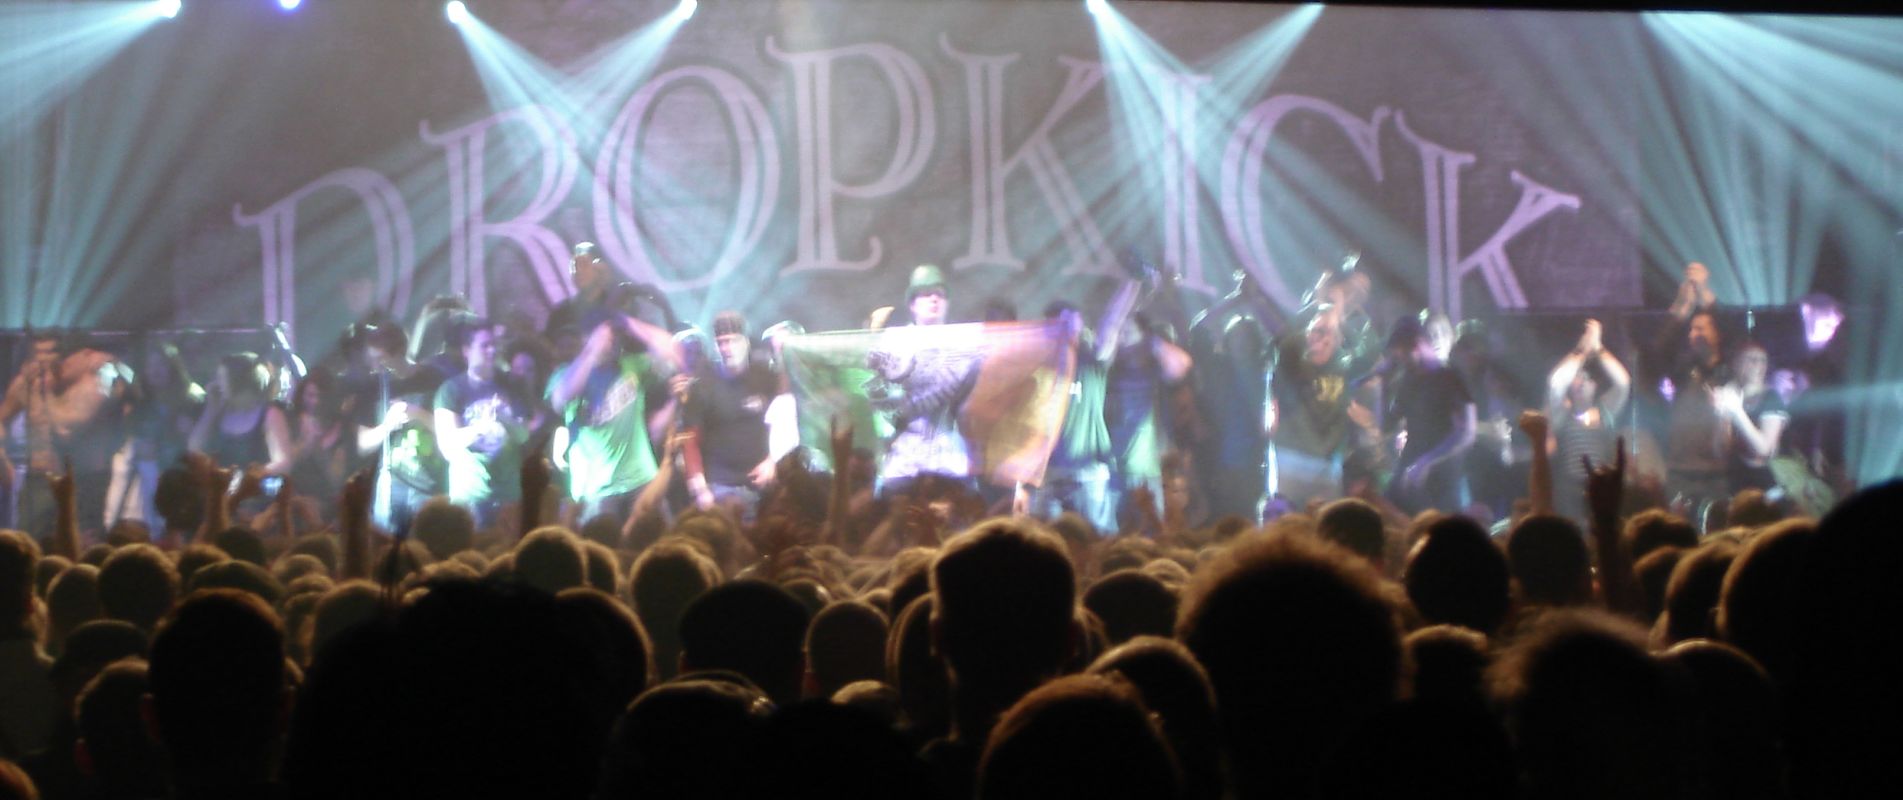 Dropkick Murphys – “Signed And Sealed In Blood”